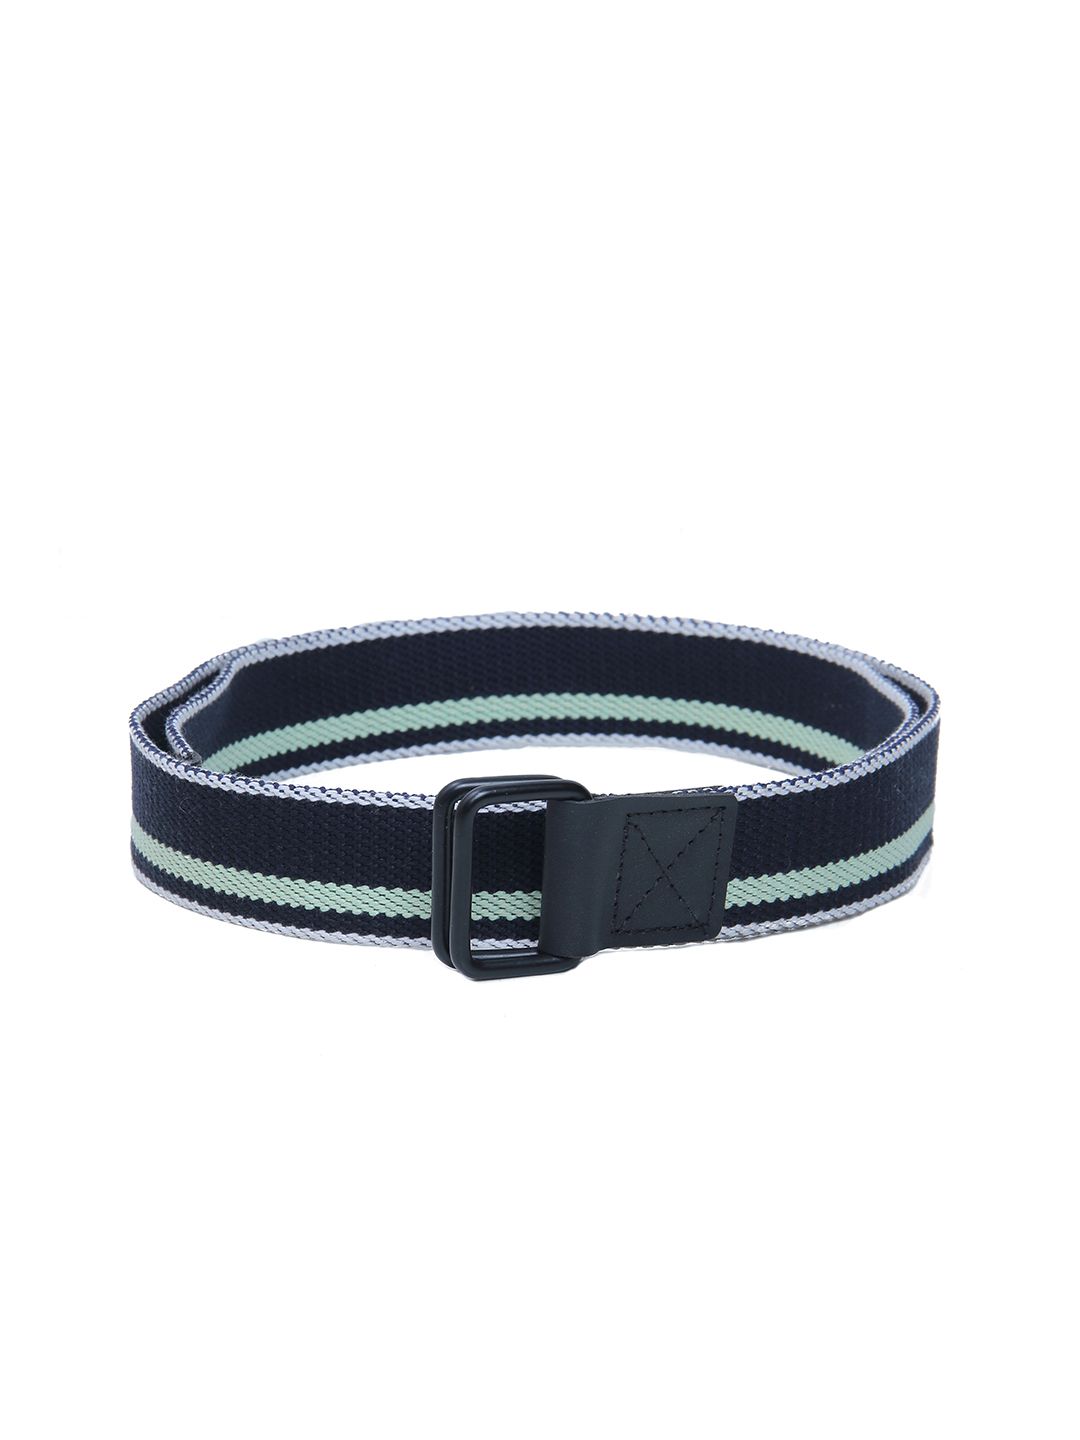 Calvadoss Woman Navy Blue Cotton Canvas Belt Price in India